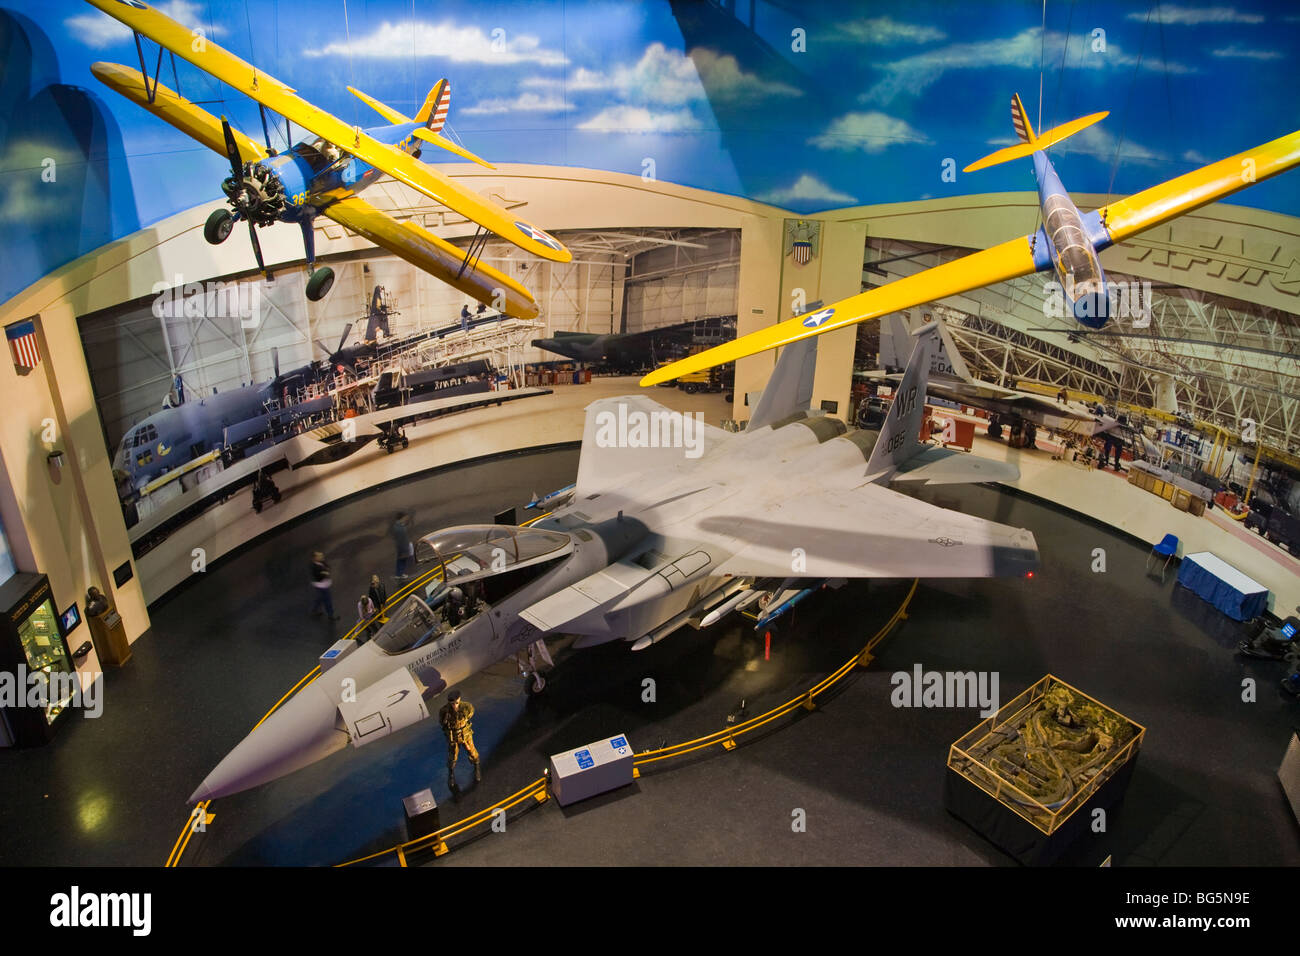 Museum of Aviation at Robins Air Force Base in Warner Robins